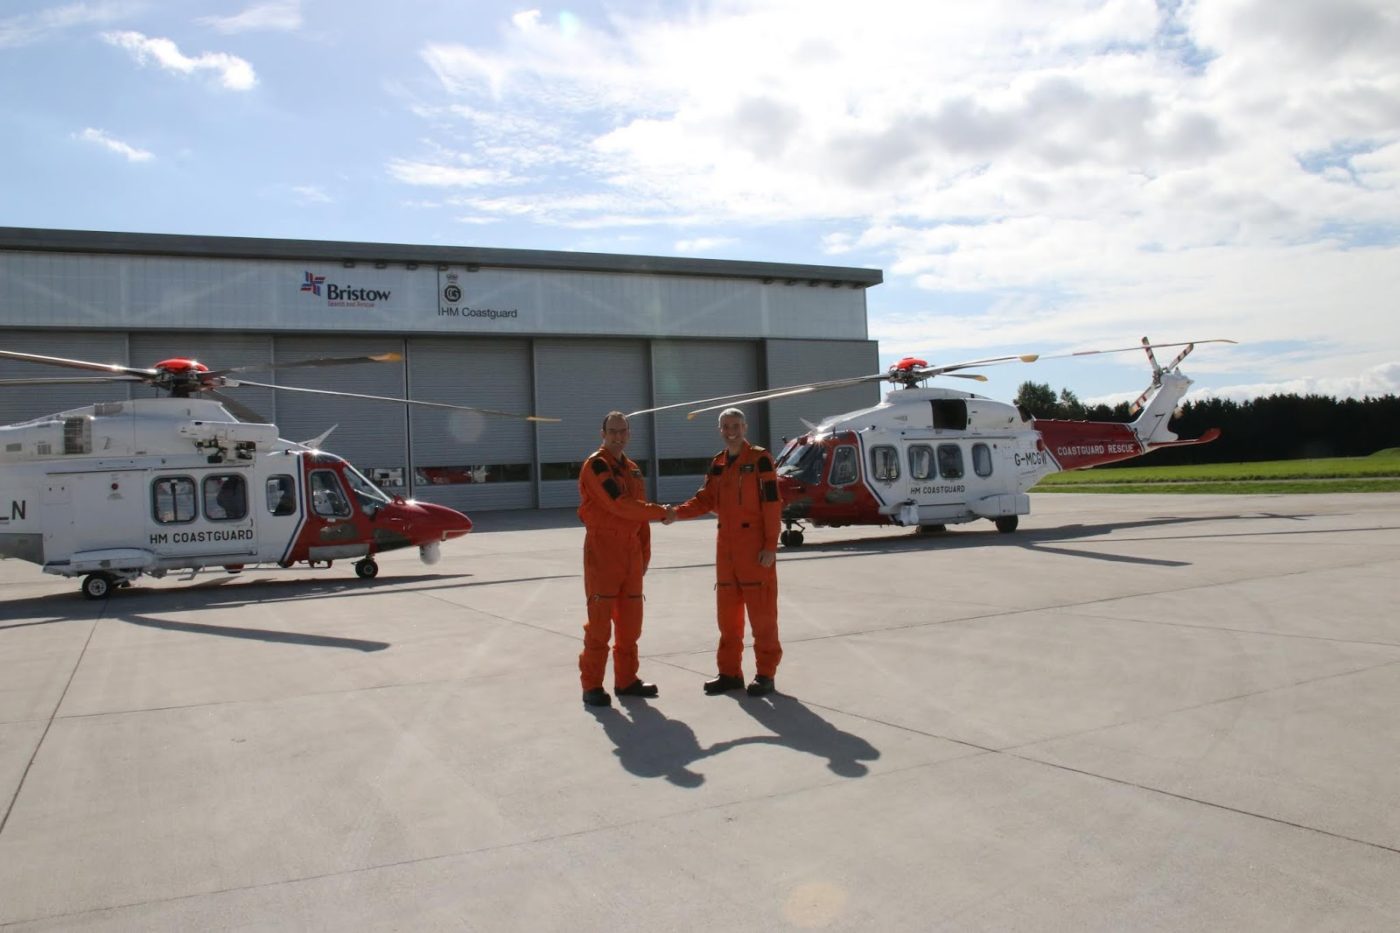 The new Leonardo AW189 helicopters, operated by Bristow Helicopters, replace St Athan’s HM Coastguard’s smaller AW139 aircraft. Maritime and Coastguard Agency Photo